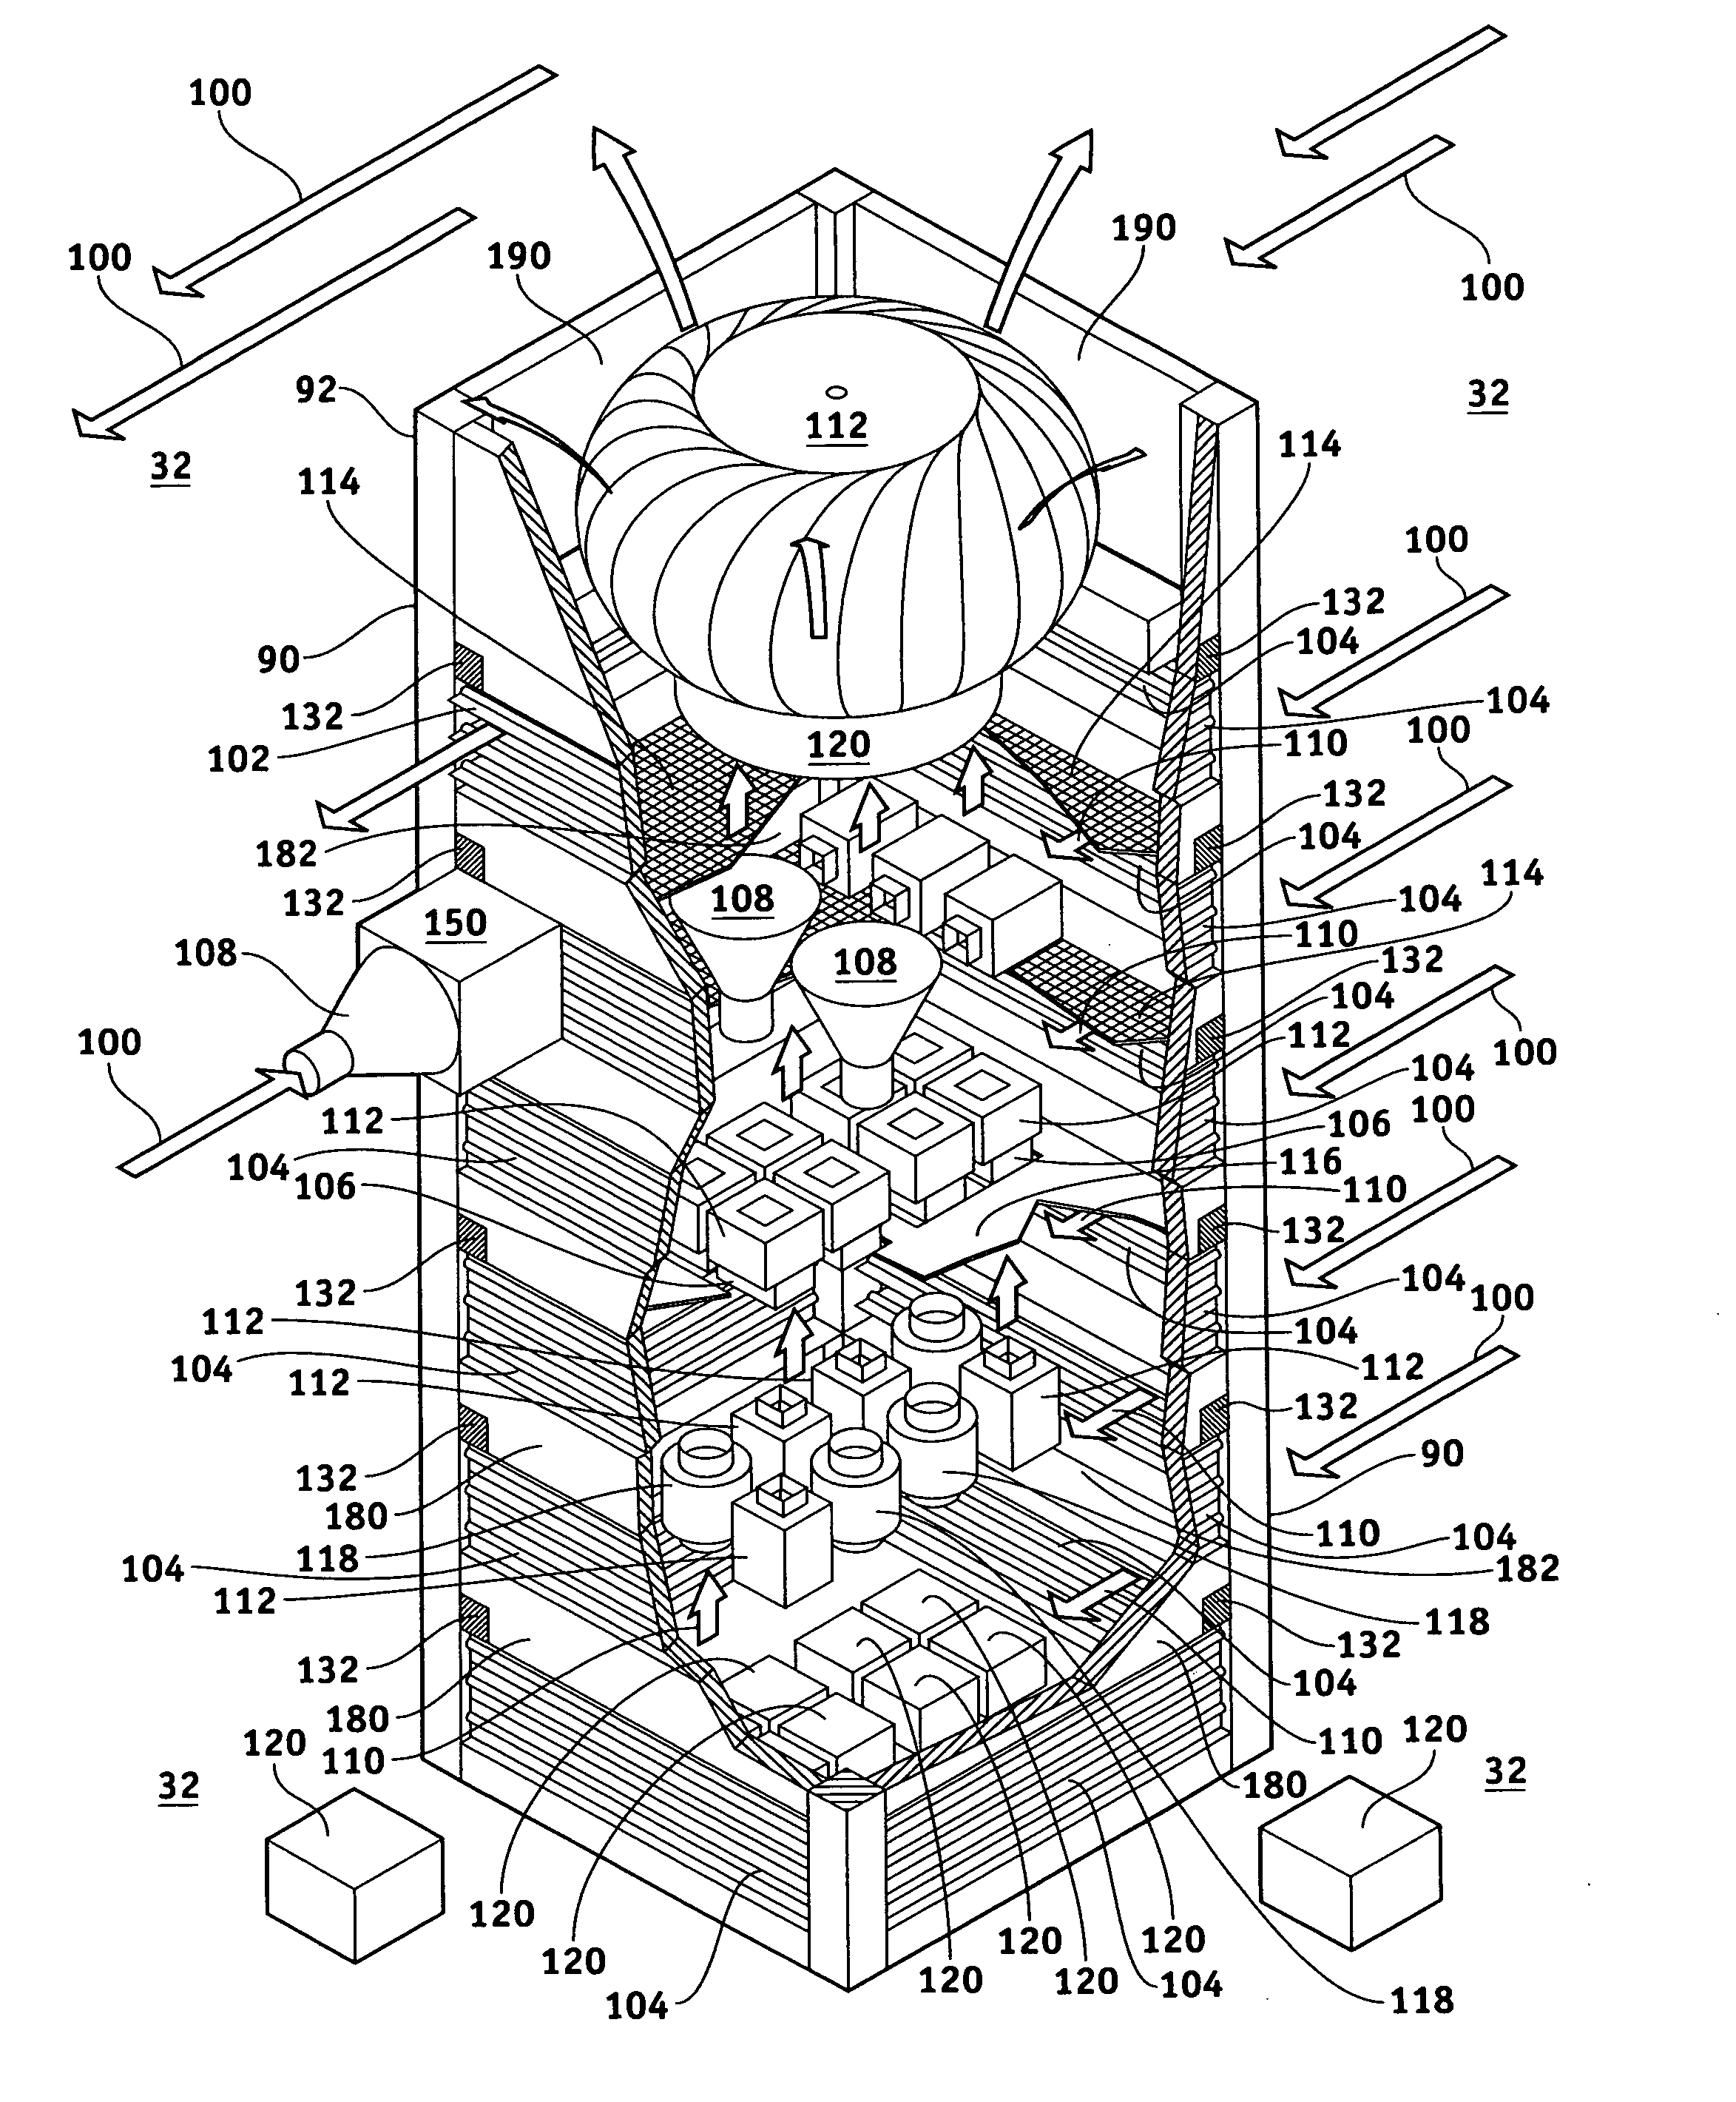 Method and apparatus to utilize the push-pull power of an upwards flow of wind energy within a structure